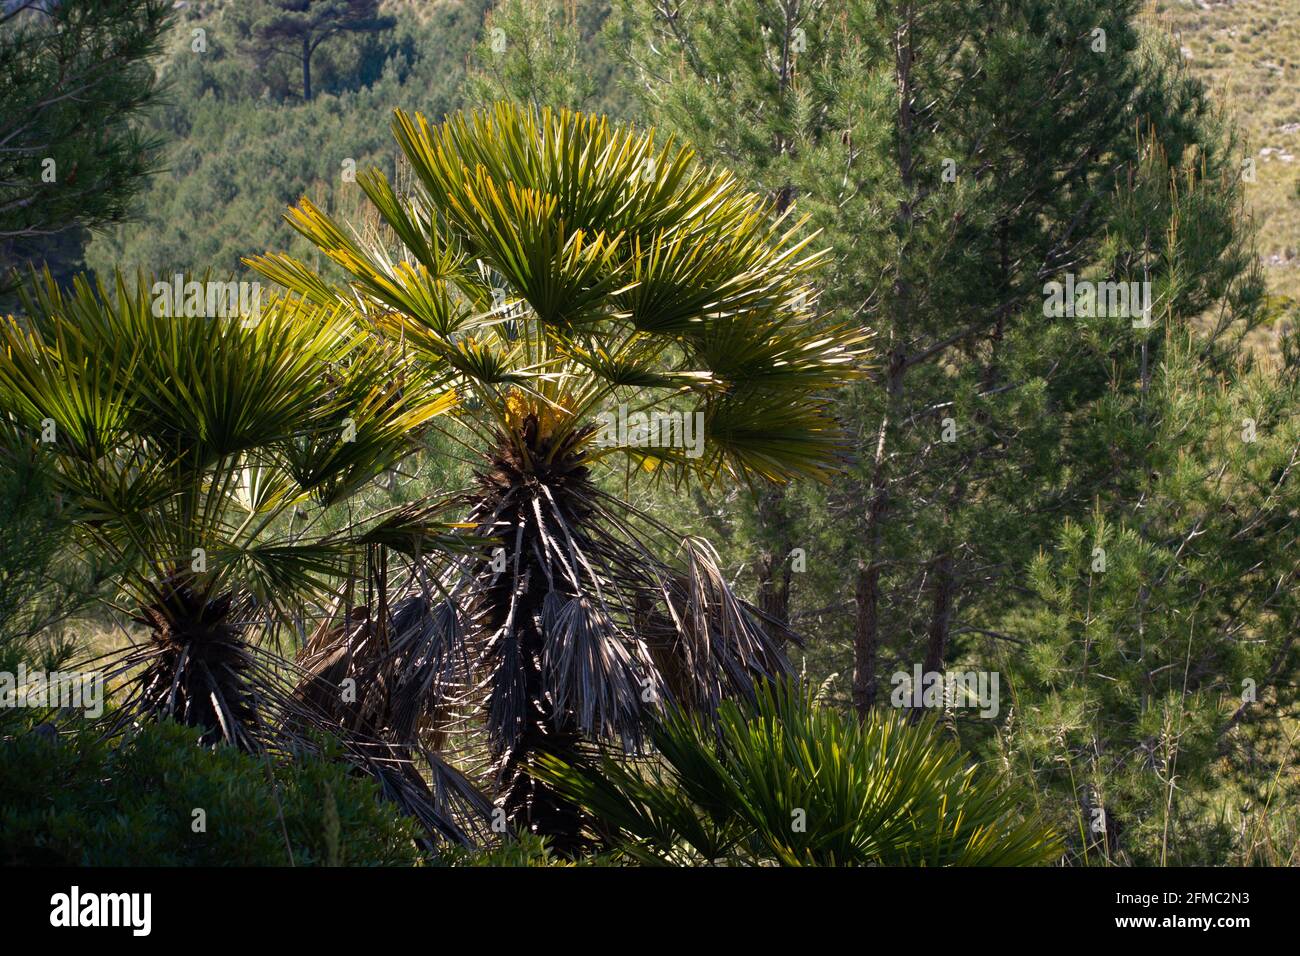 The dwarf palm, Chamaerops humilis, with leaves in sunlight, in front of pine trees, on Balearic island Majorca Stock Photo